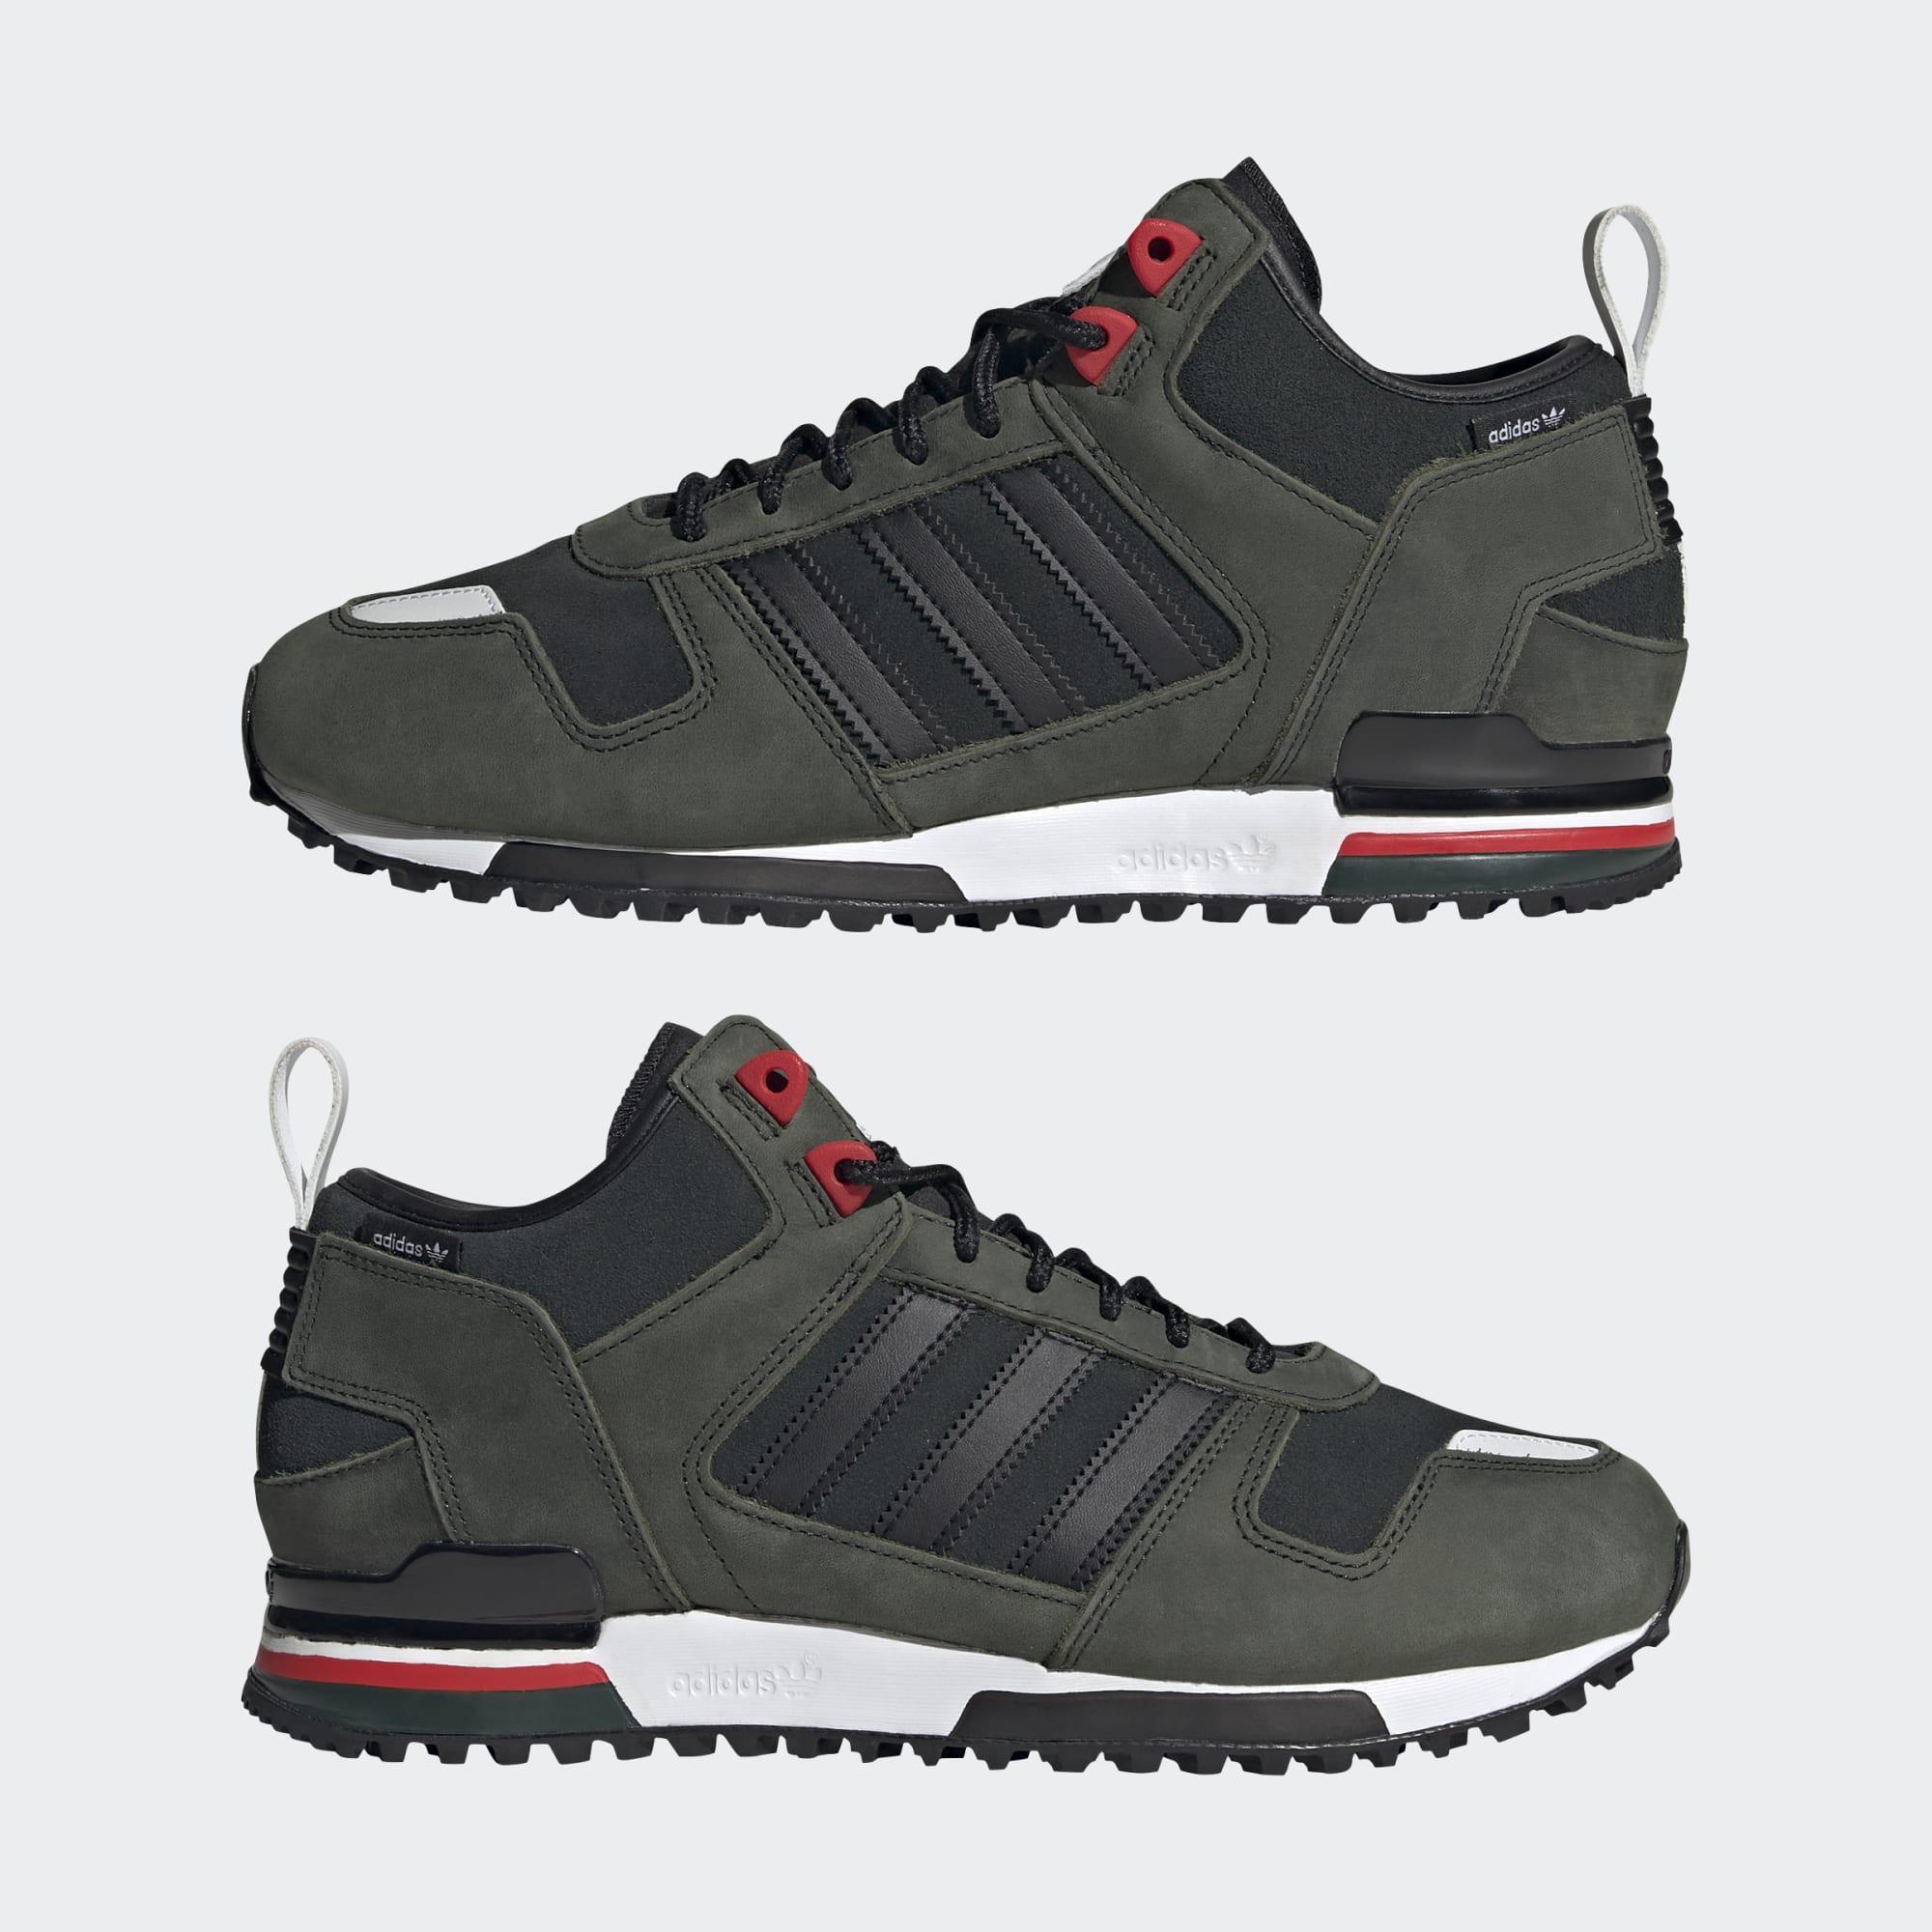 adidas Zx 700 Winter Shoes in Green for Men Lyst UK